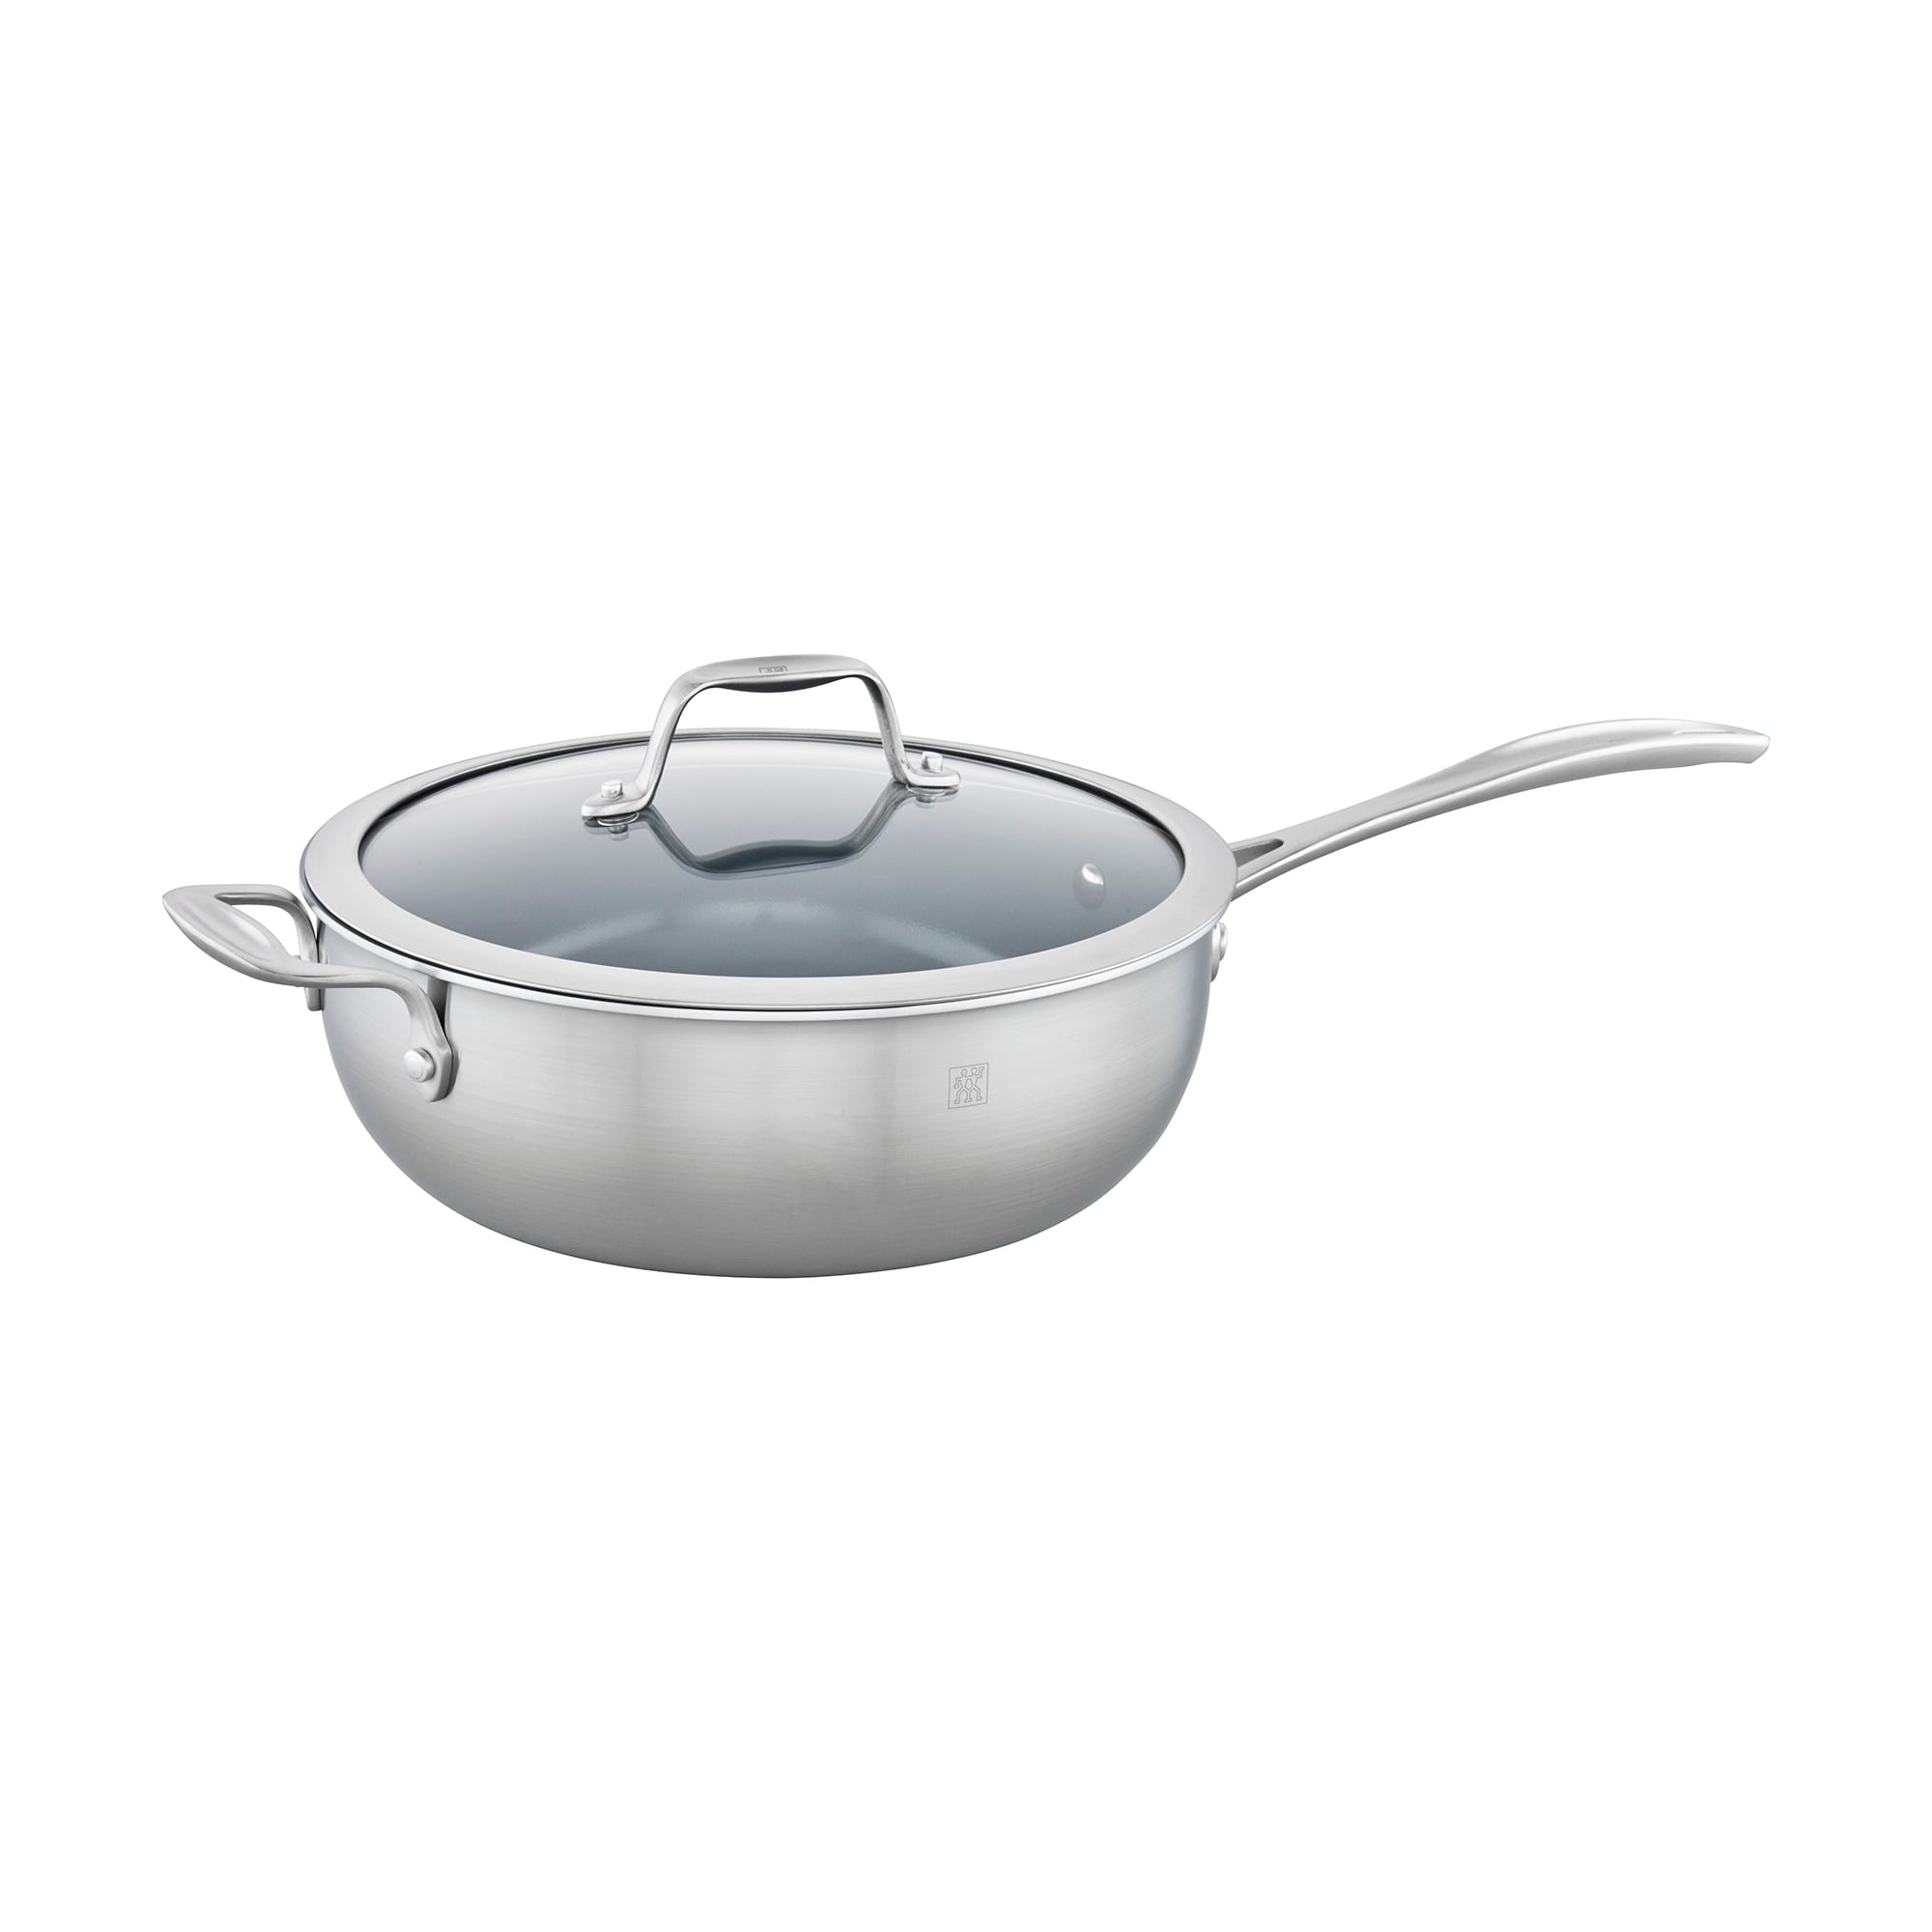 https://ak1.ostkcdn.com/images/products/is/images/direct/79bd9ae691eb745f4a2be2605ec037128dca66bd/ZWILLING-Spirit-3-ply-4.6-qt-Stainless-Steel-Ceramic-Nonstick-Perfect-Pan.jpg